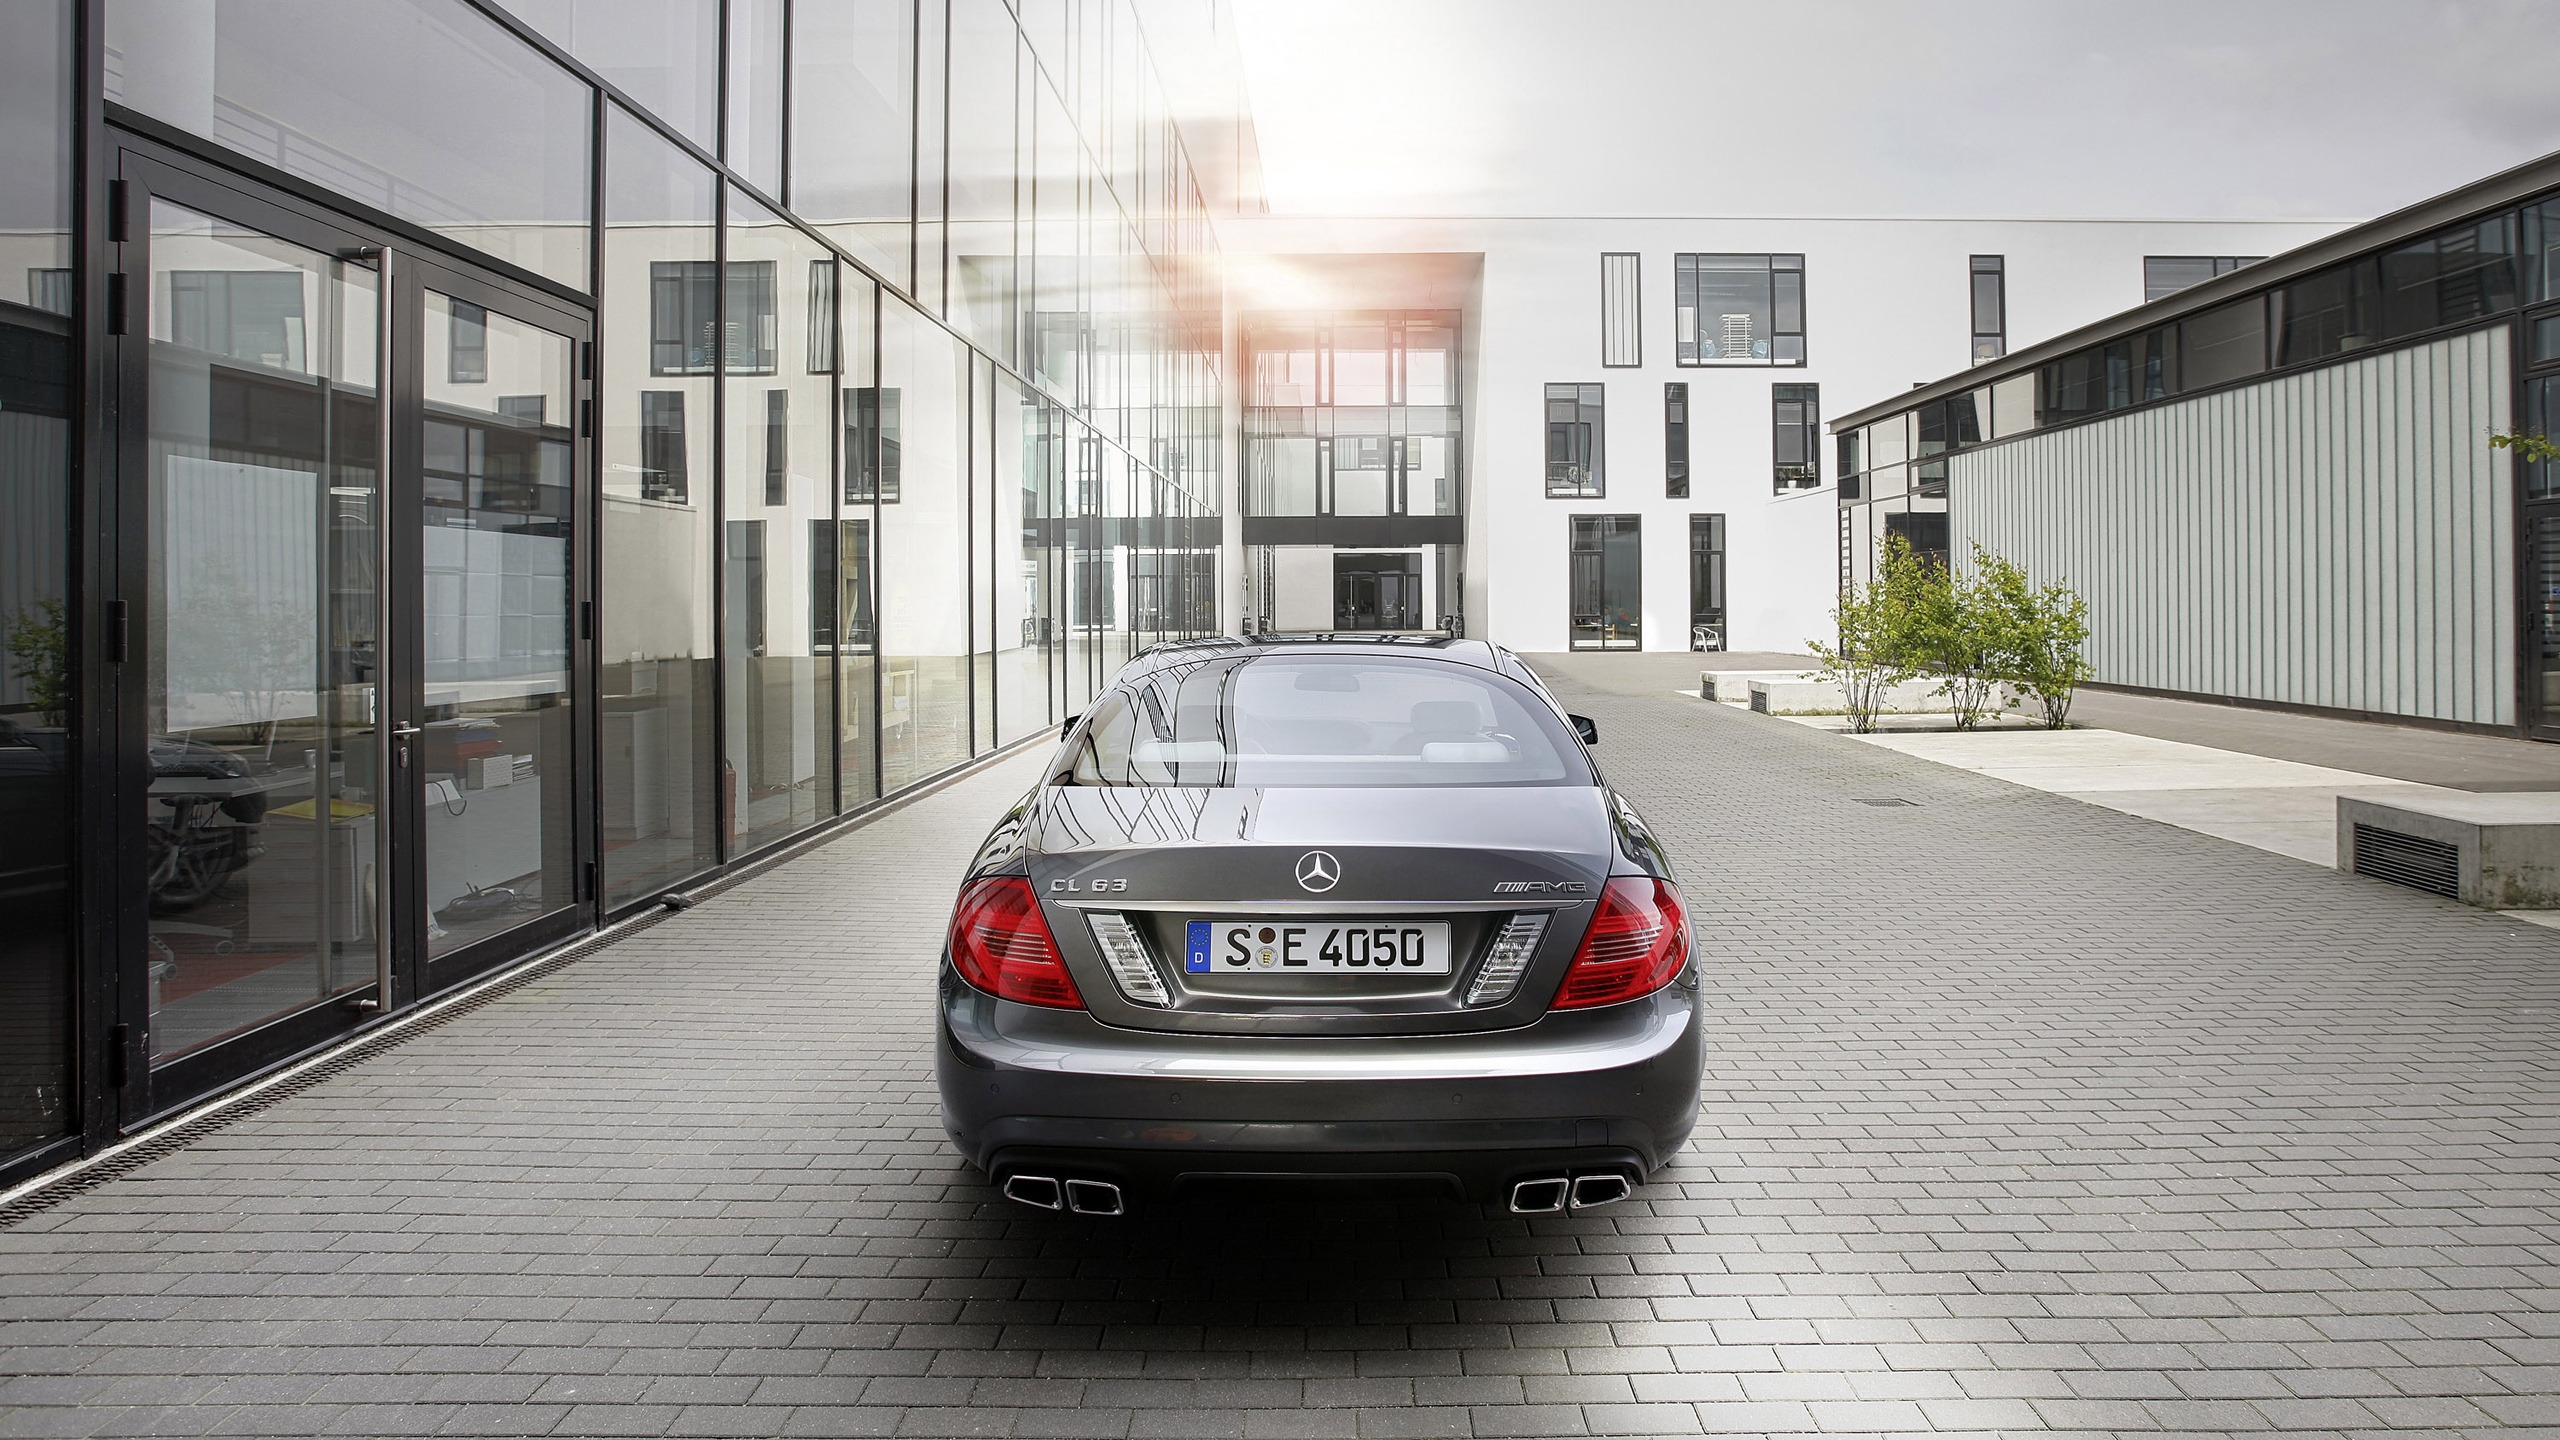 Mercedes CL63 AMG 2011 Rear for 2560x1440 HDTV resolution